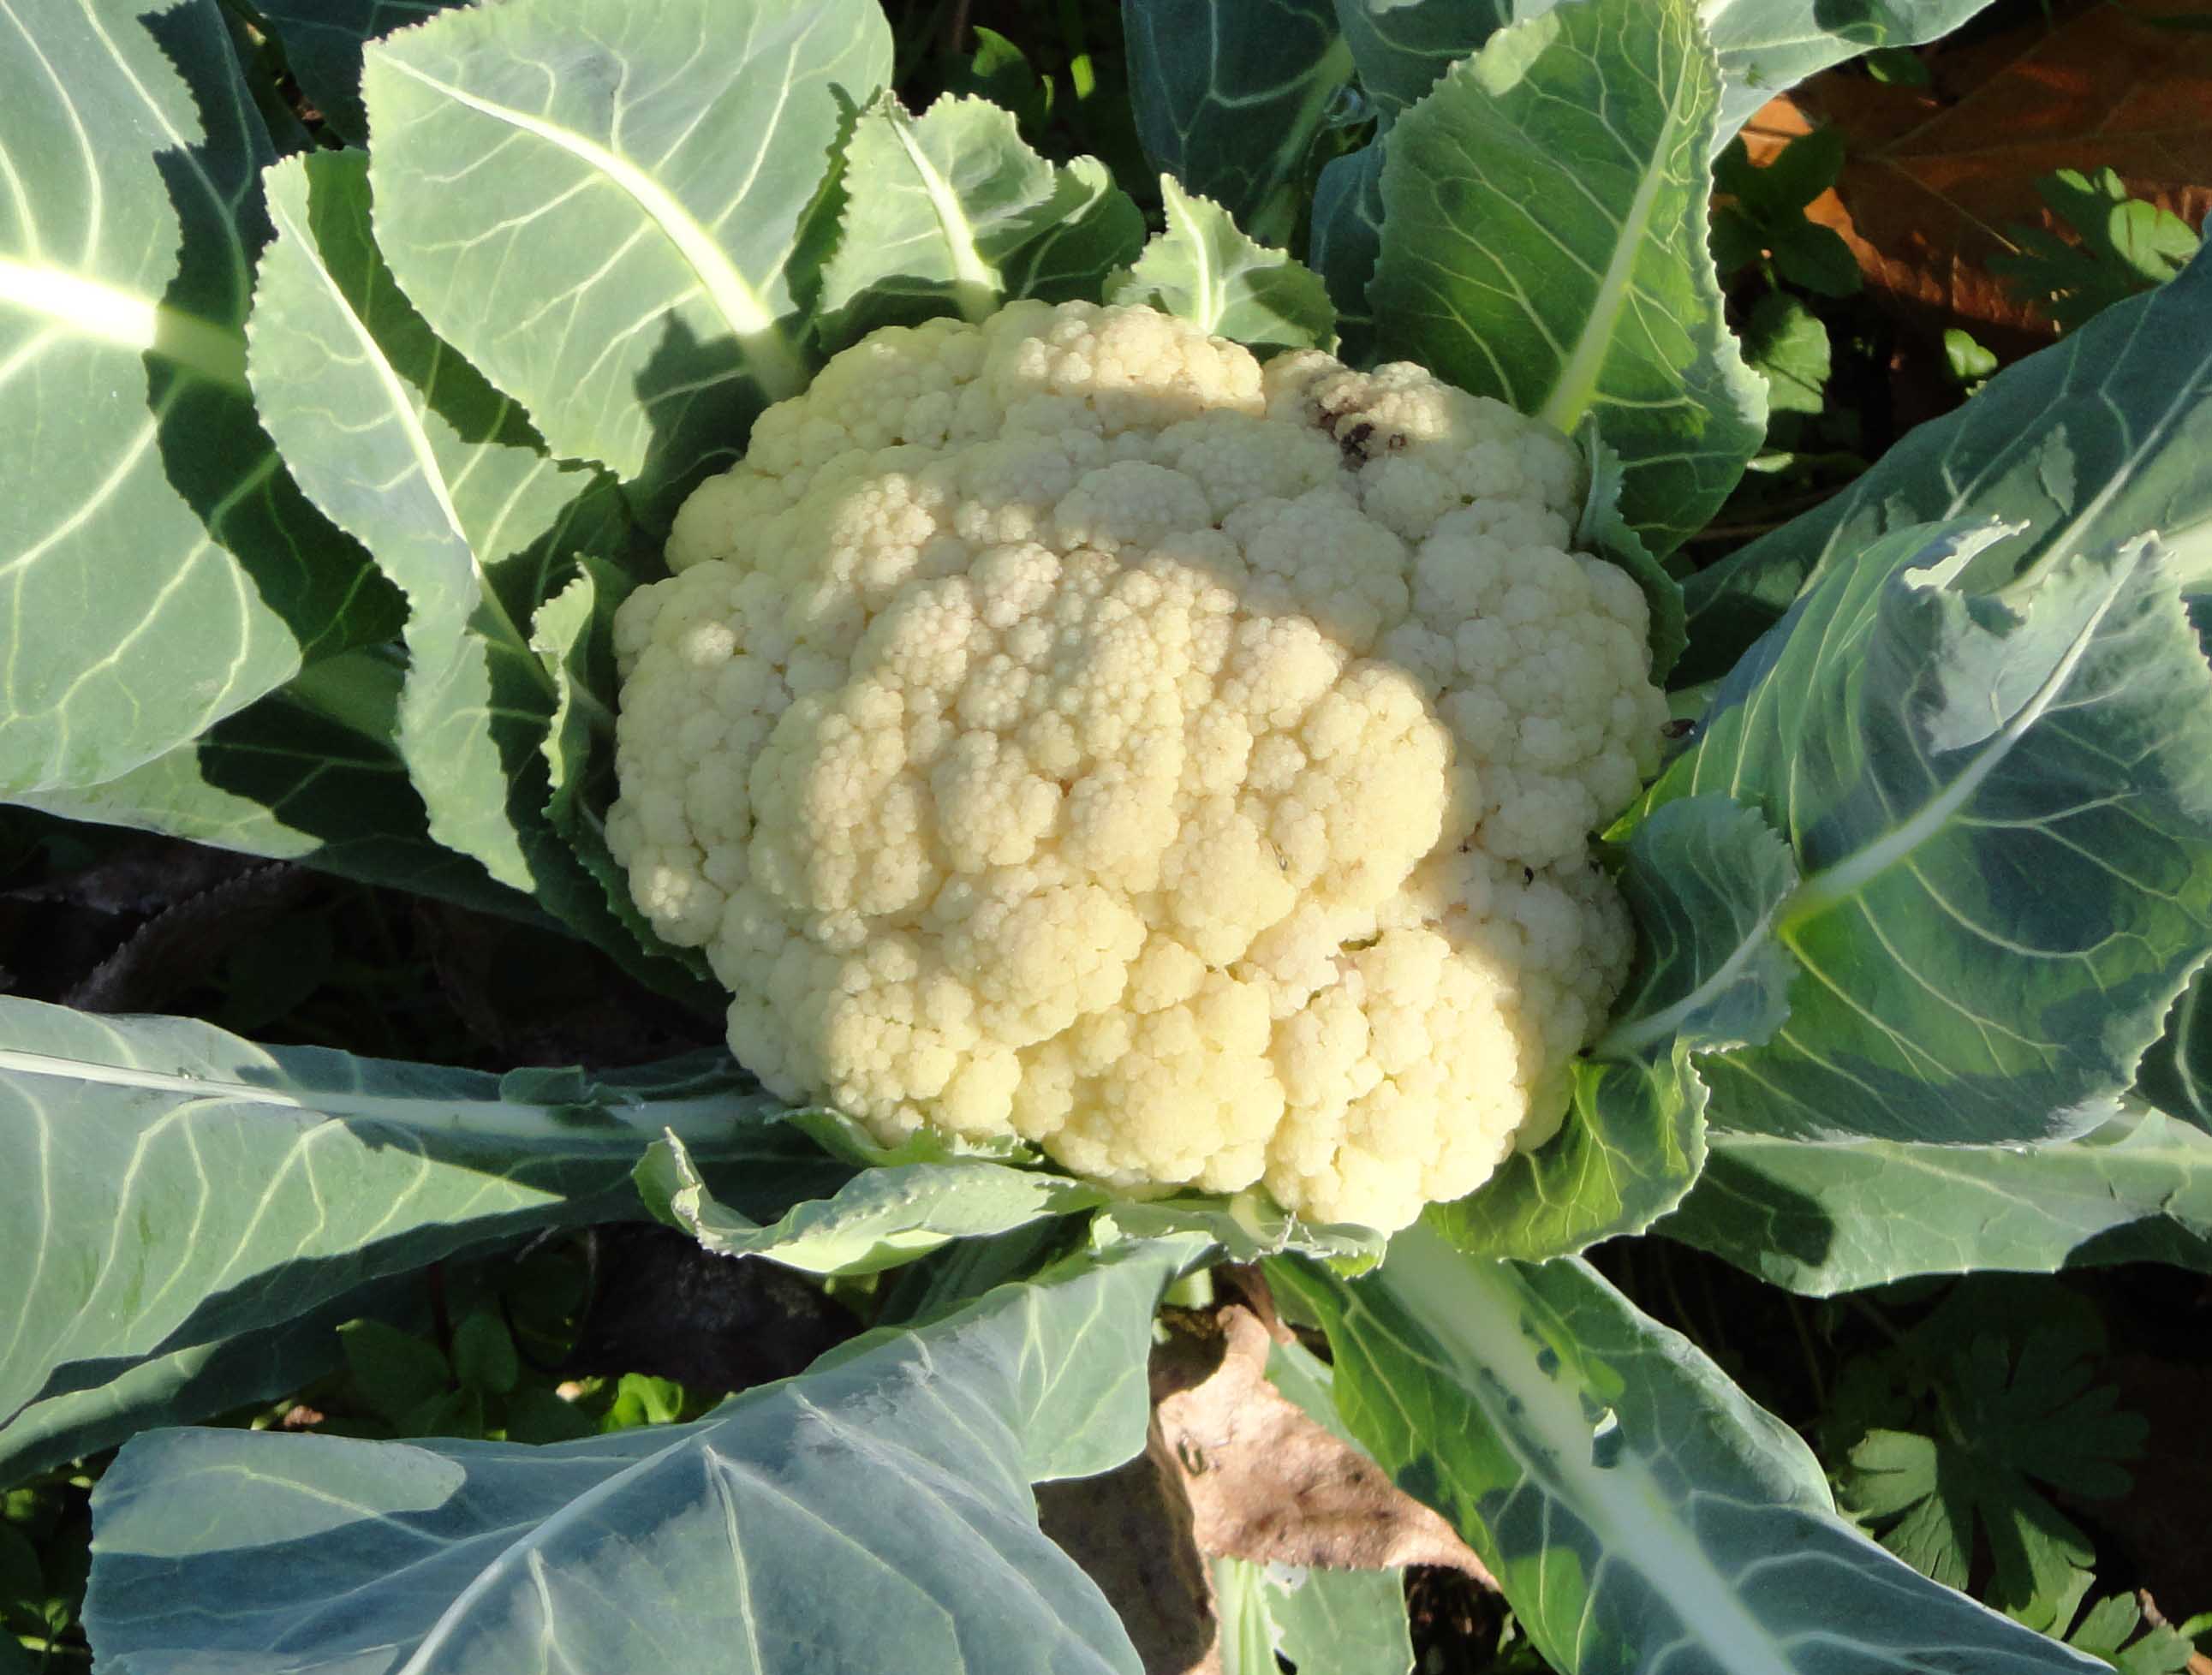 March is the ideal time to plant cauliflower in a spring garden, but it can also be planted in September or October.